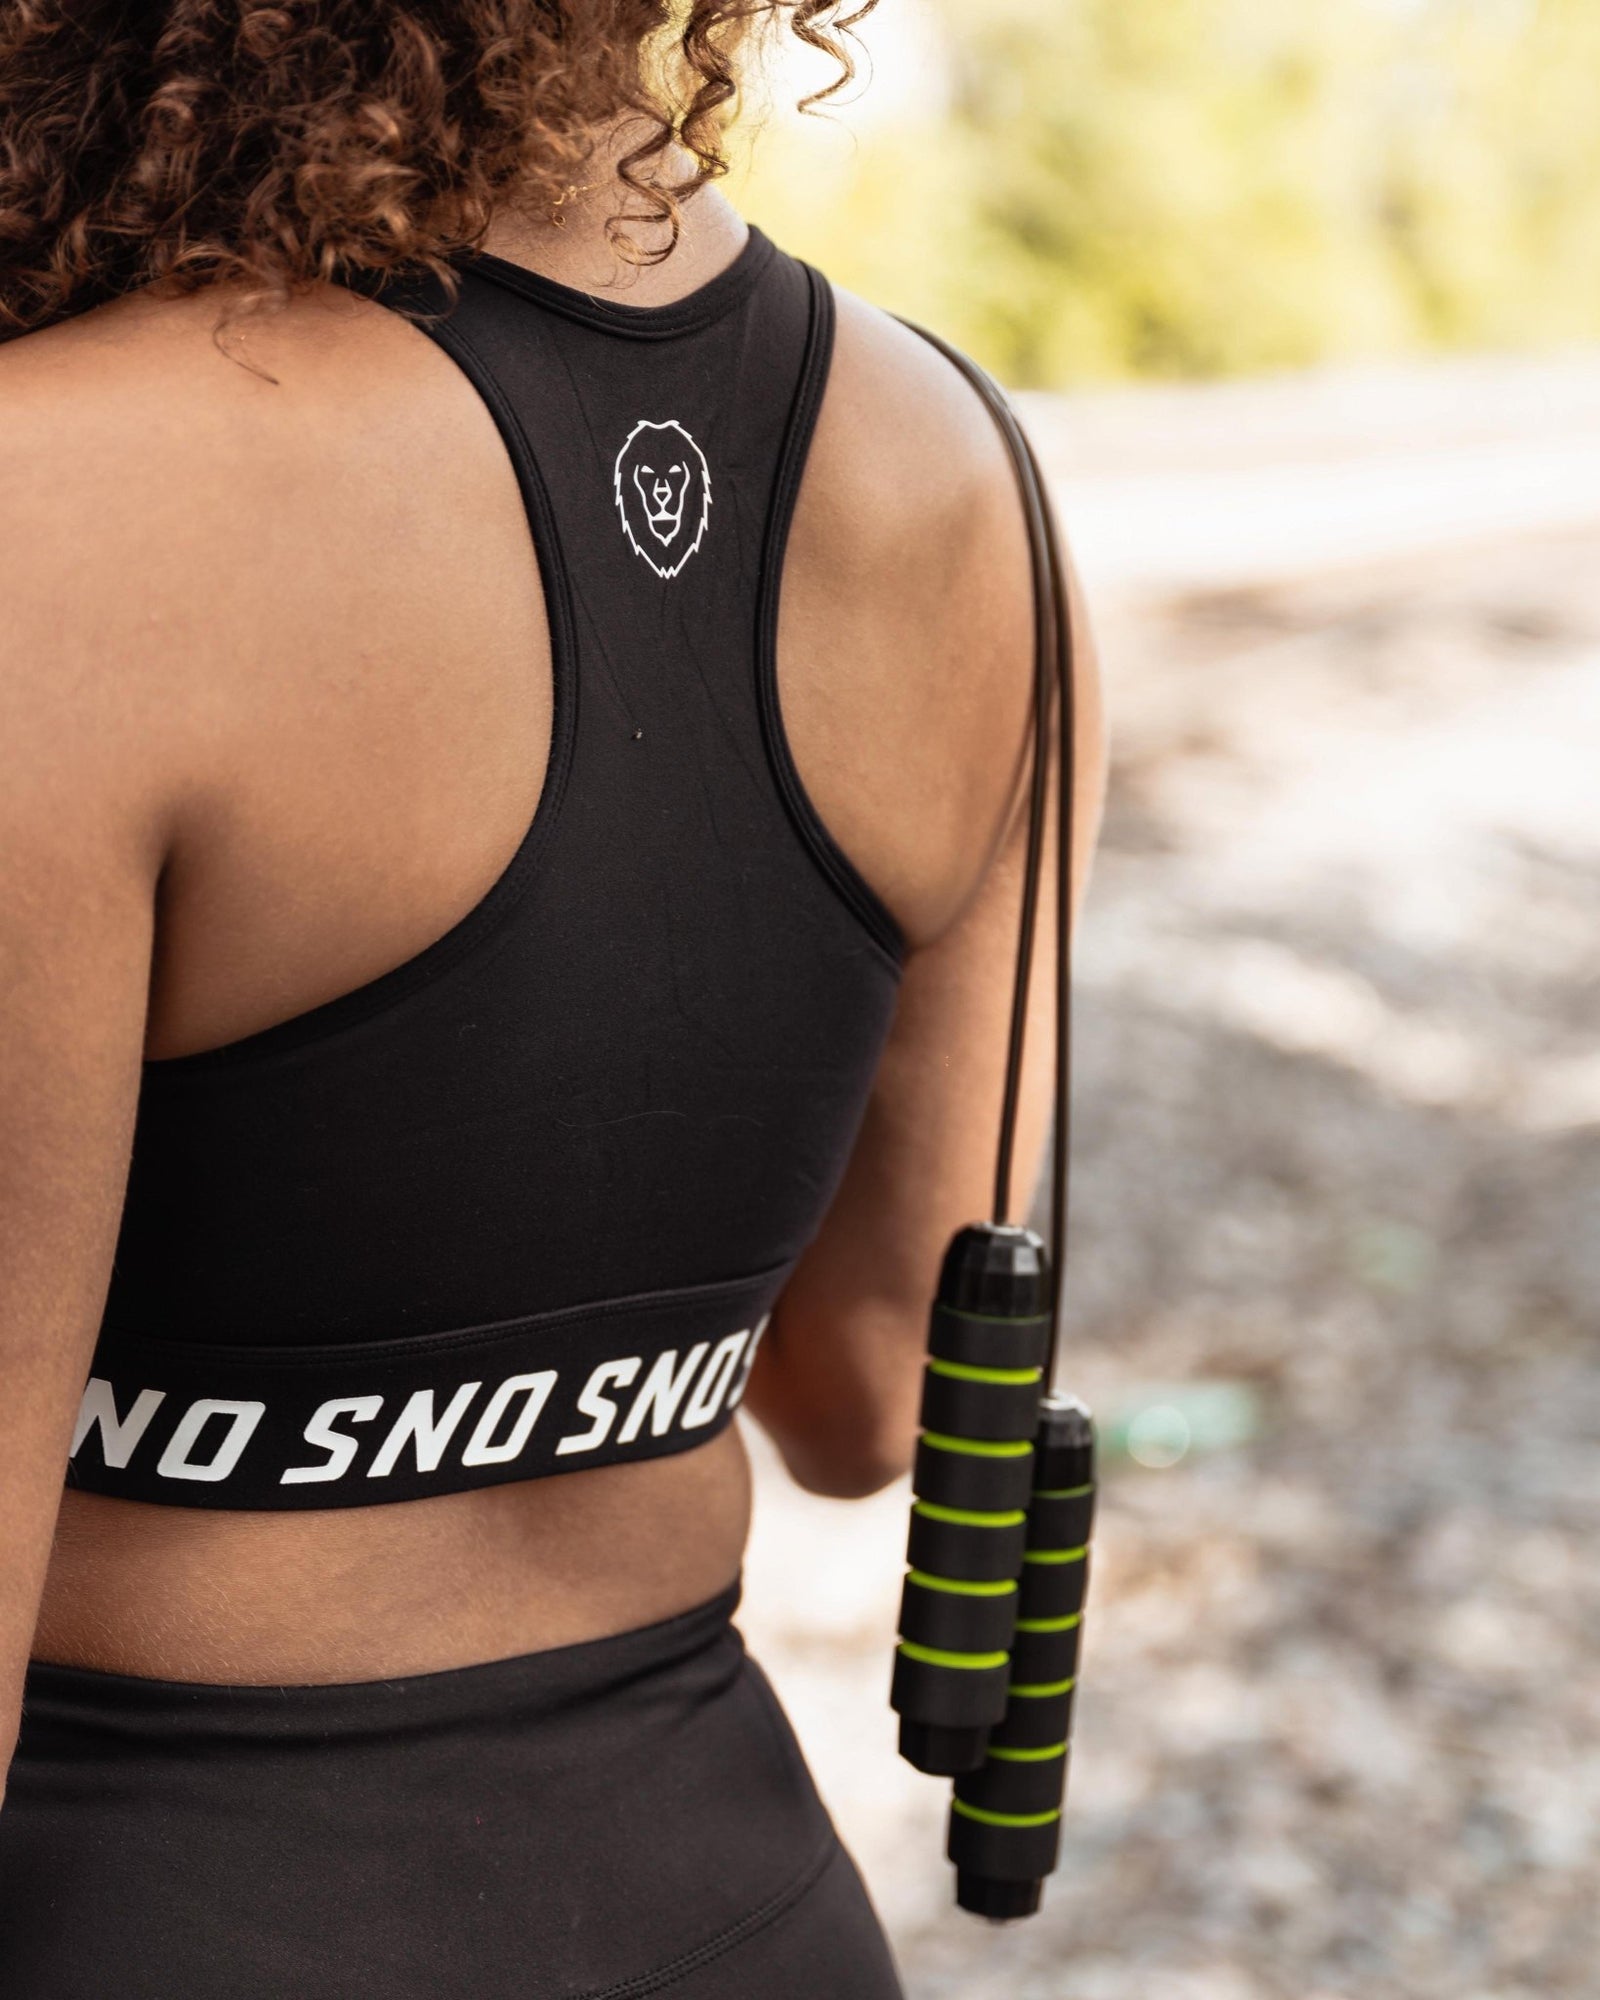 Top 5 Activewear brands similar to SNO sportswear to choose your gym outfits from - SNO